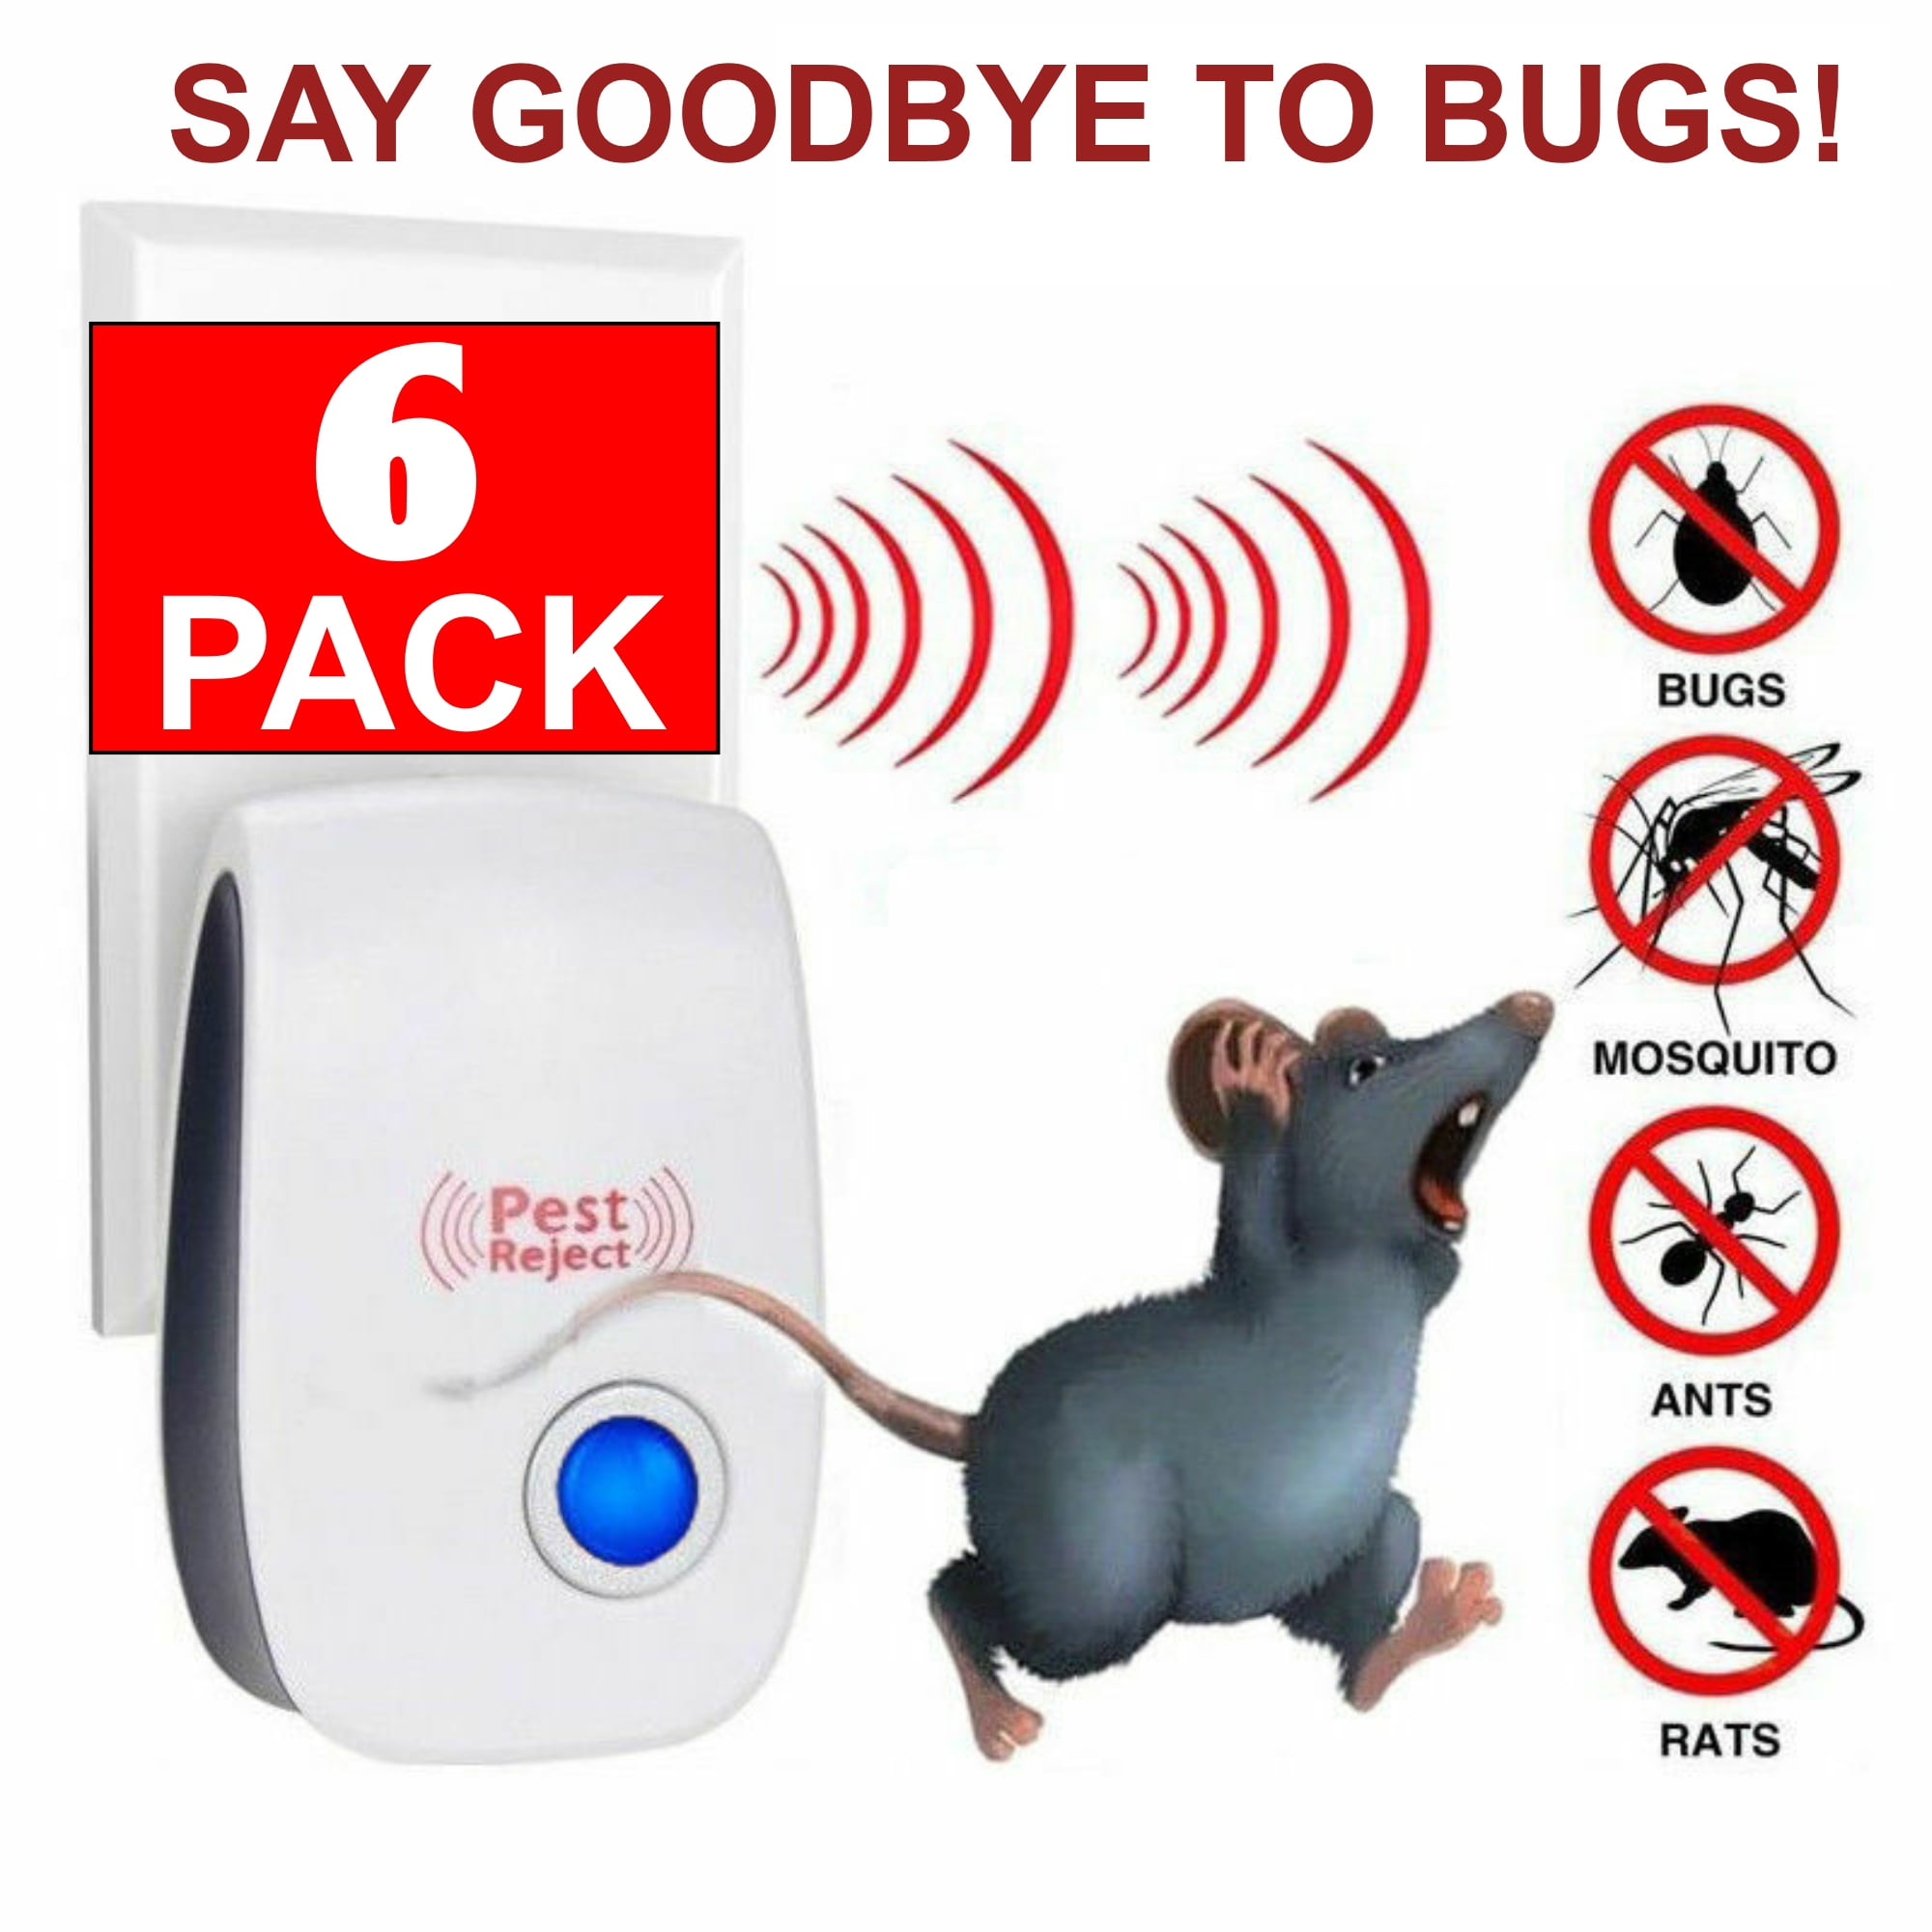 6 Pack Ultrasonic Pest Repeller Control Electronic Repellent Mice Rat Reject US 